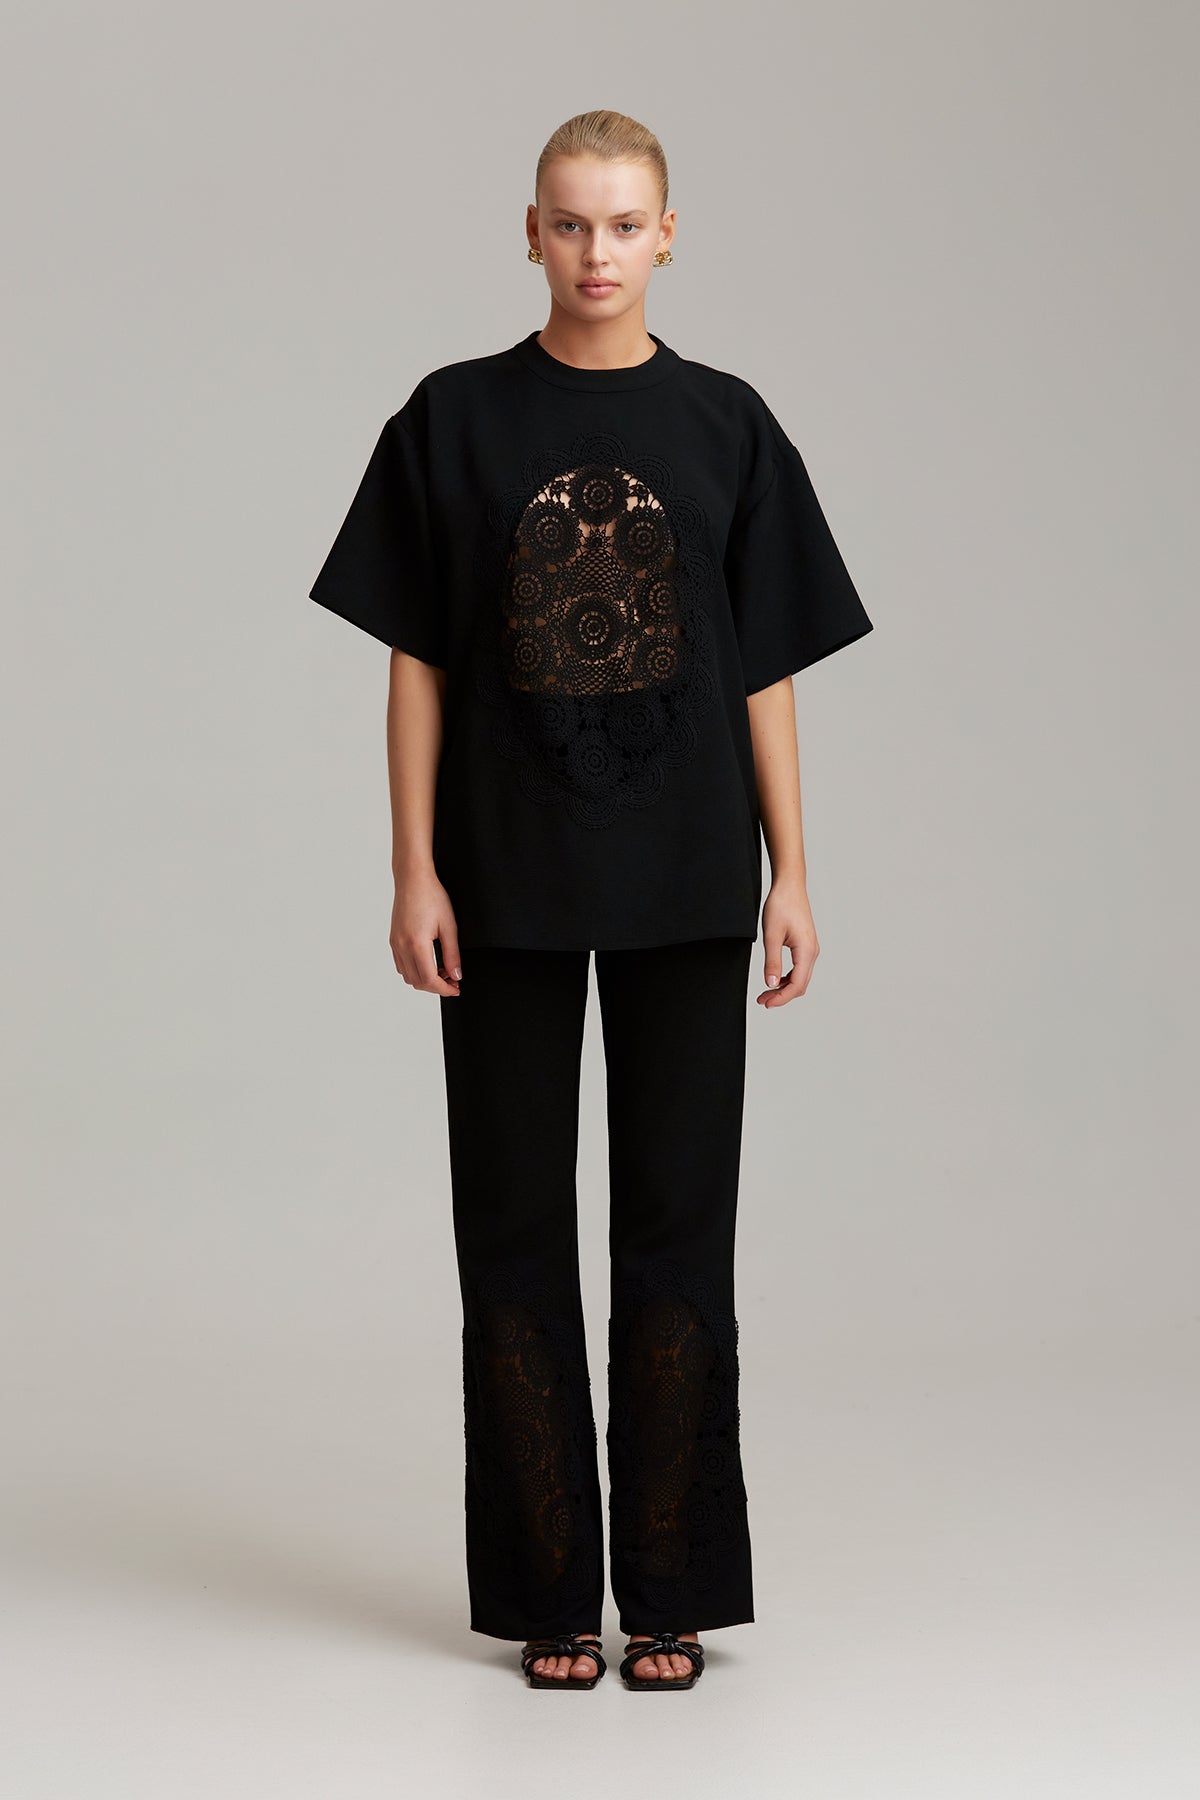 C/MEO Collective - Moments Ago T-Shirt - Black